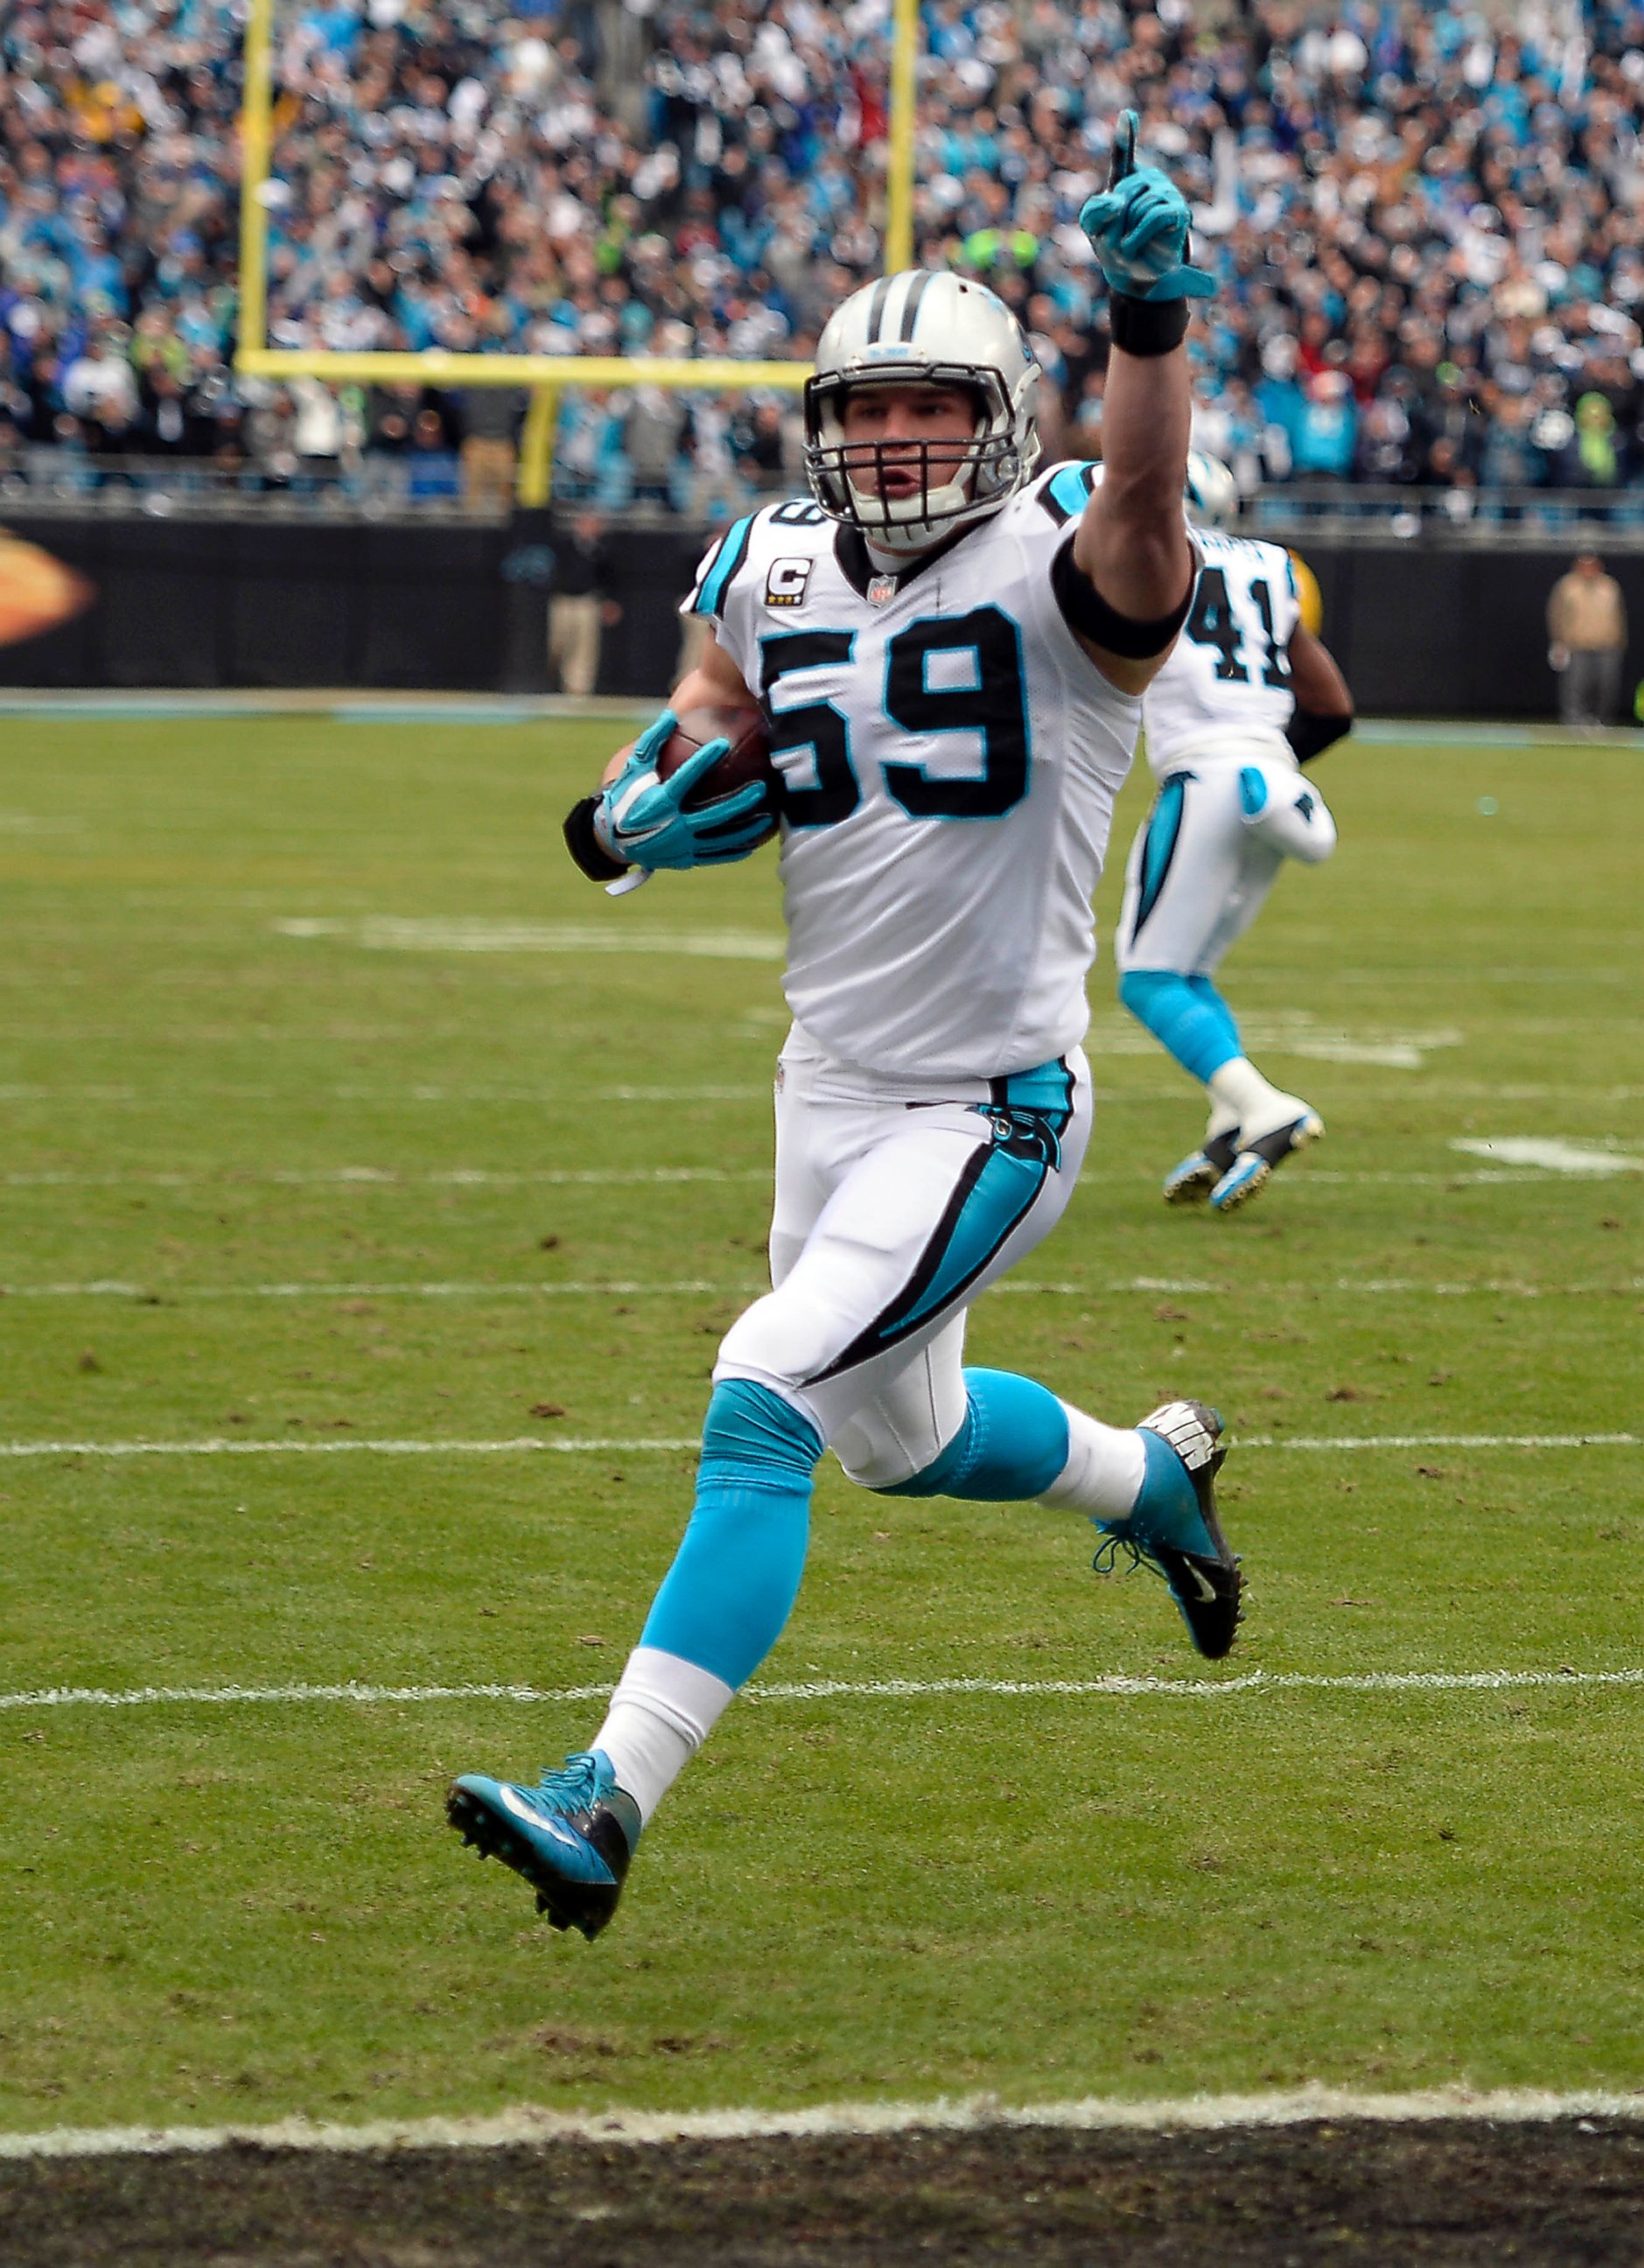 PHOTO: Luke Kuechly celebrates as he returns an interception for a touchdown during the first quarter on Jan. 17, 2016, at Bank of America Stadium in Charlotte, N.C. 